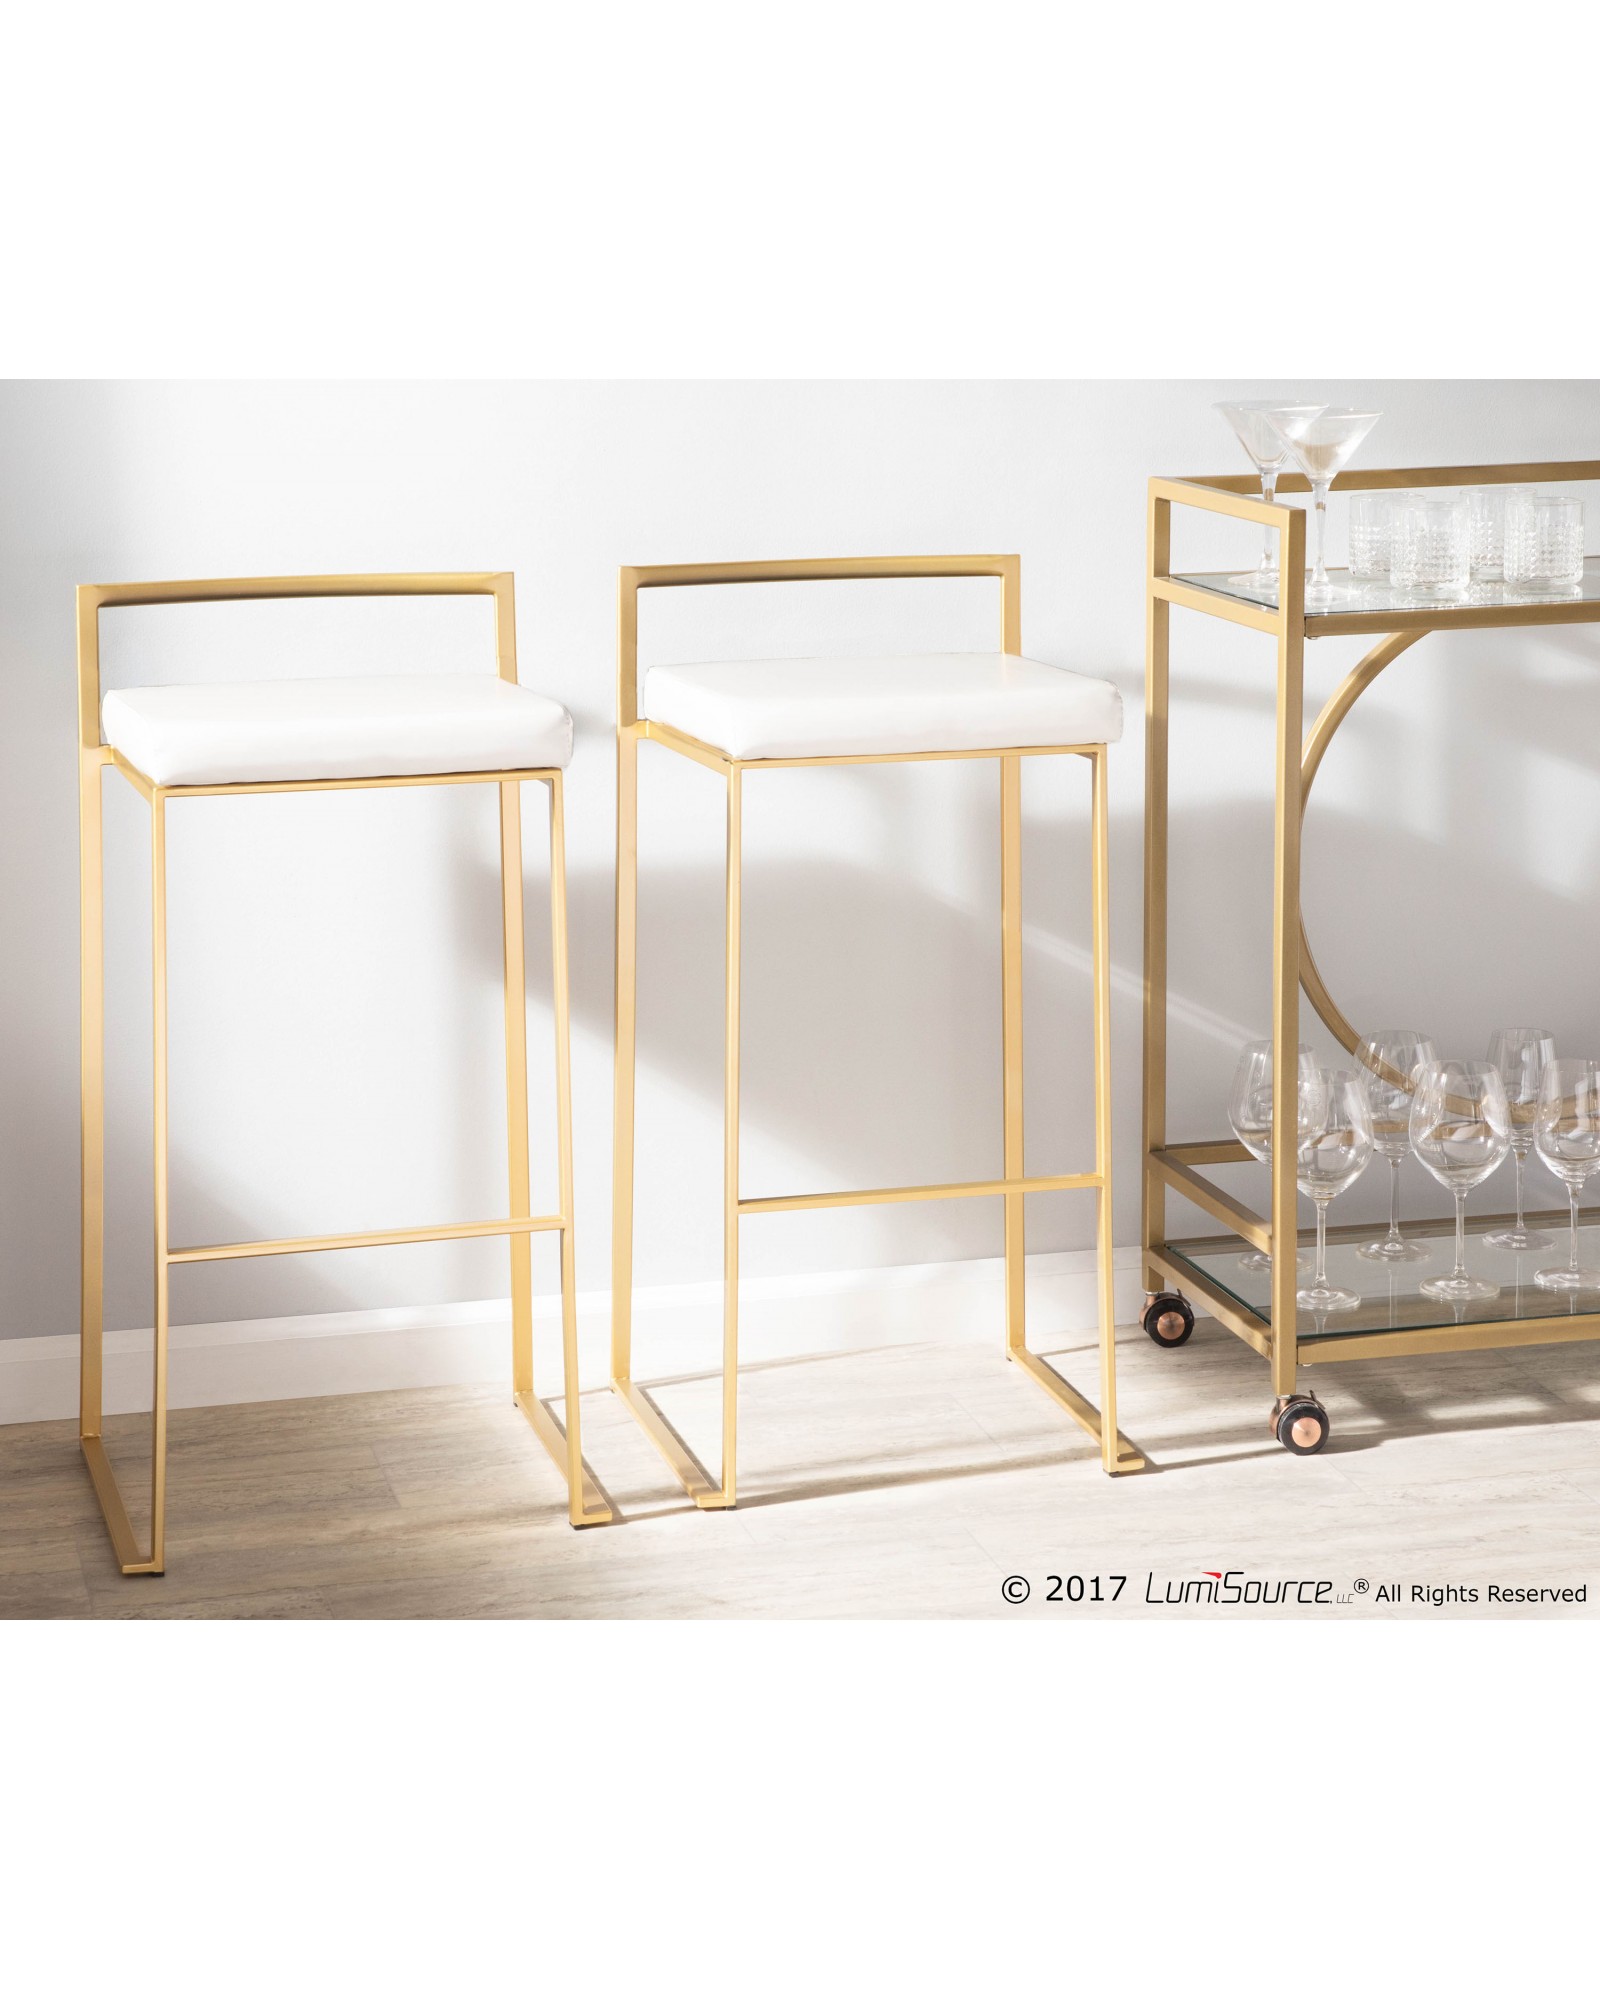 Fuji Contemporary-Glam Barstool in Gold with White Faux Leather - Set of 2